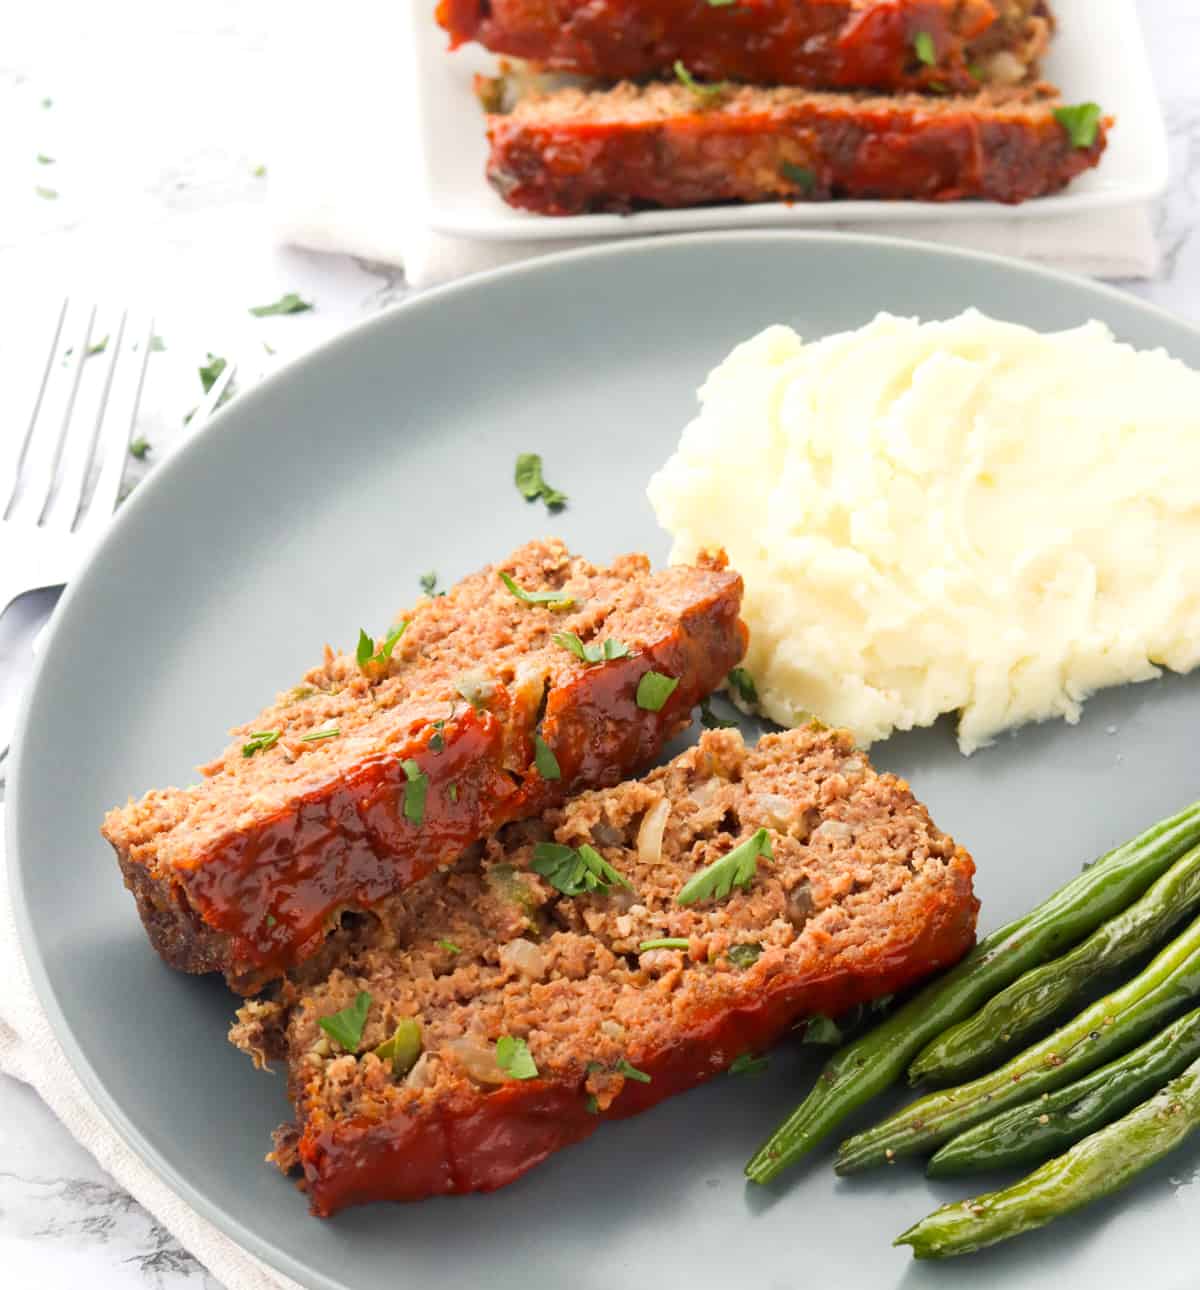 Enjoying meatloaf with roasted green beans and mashed potatoes